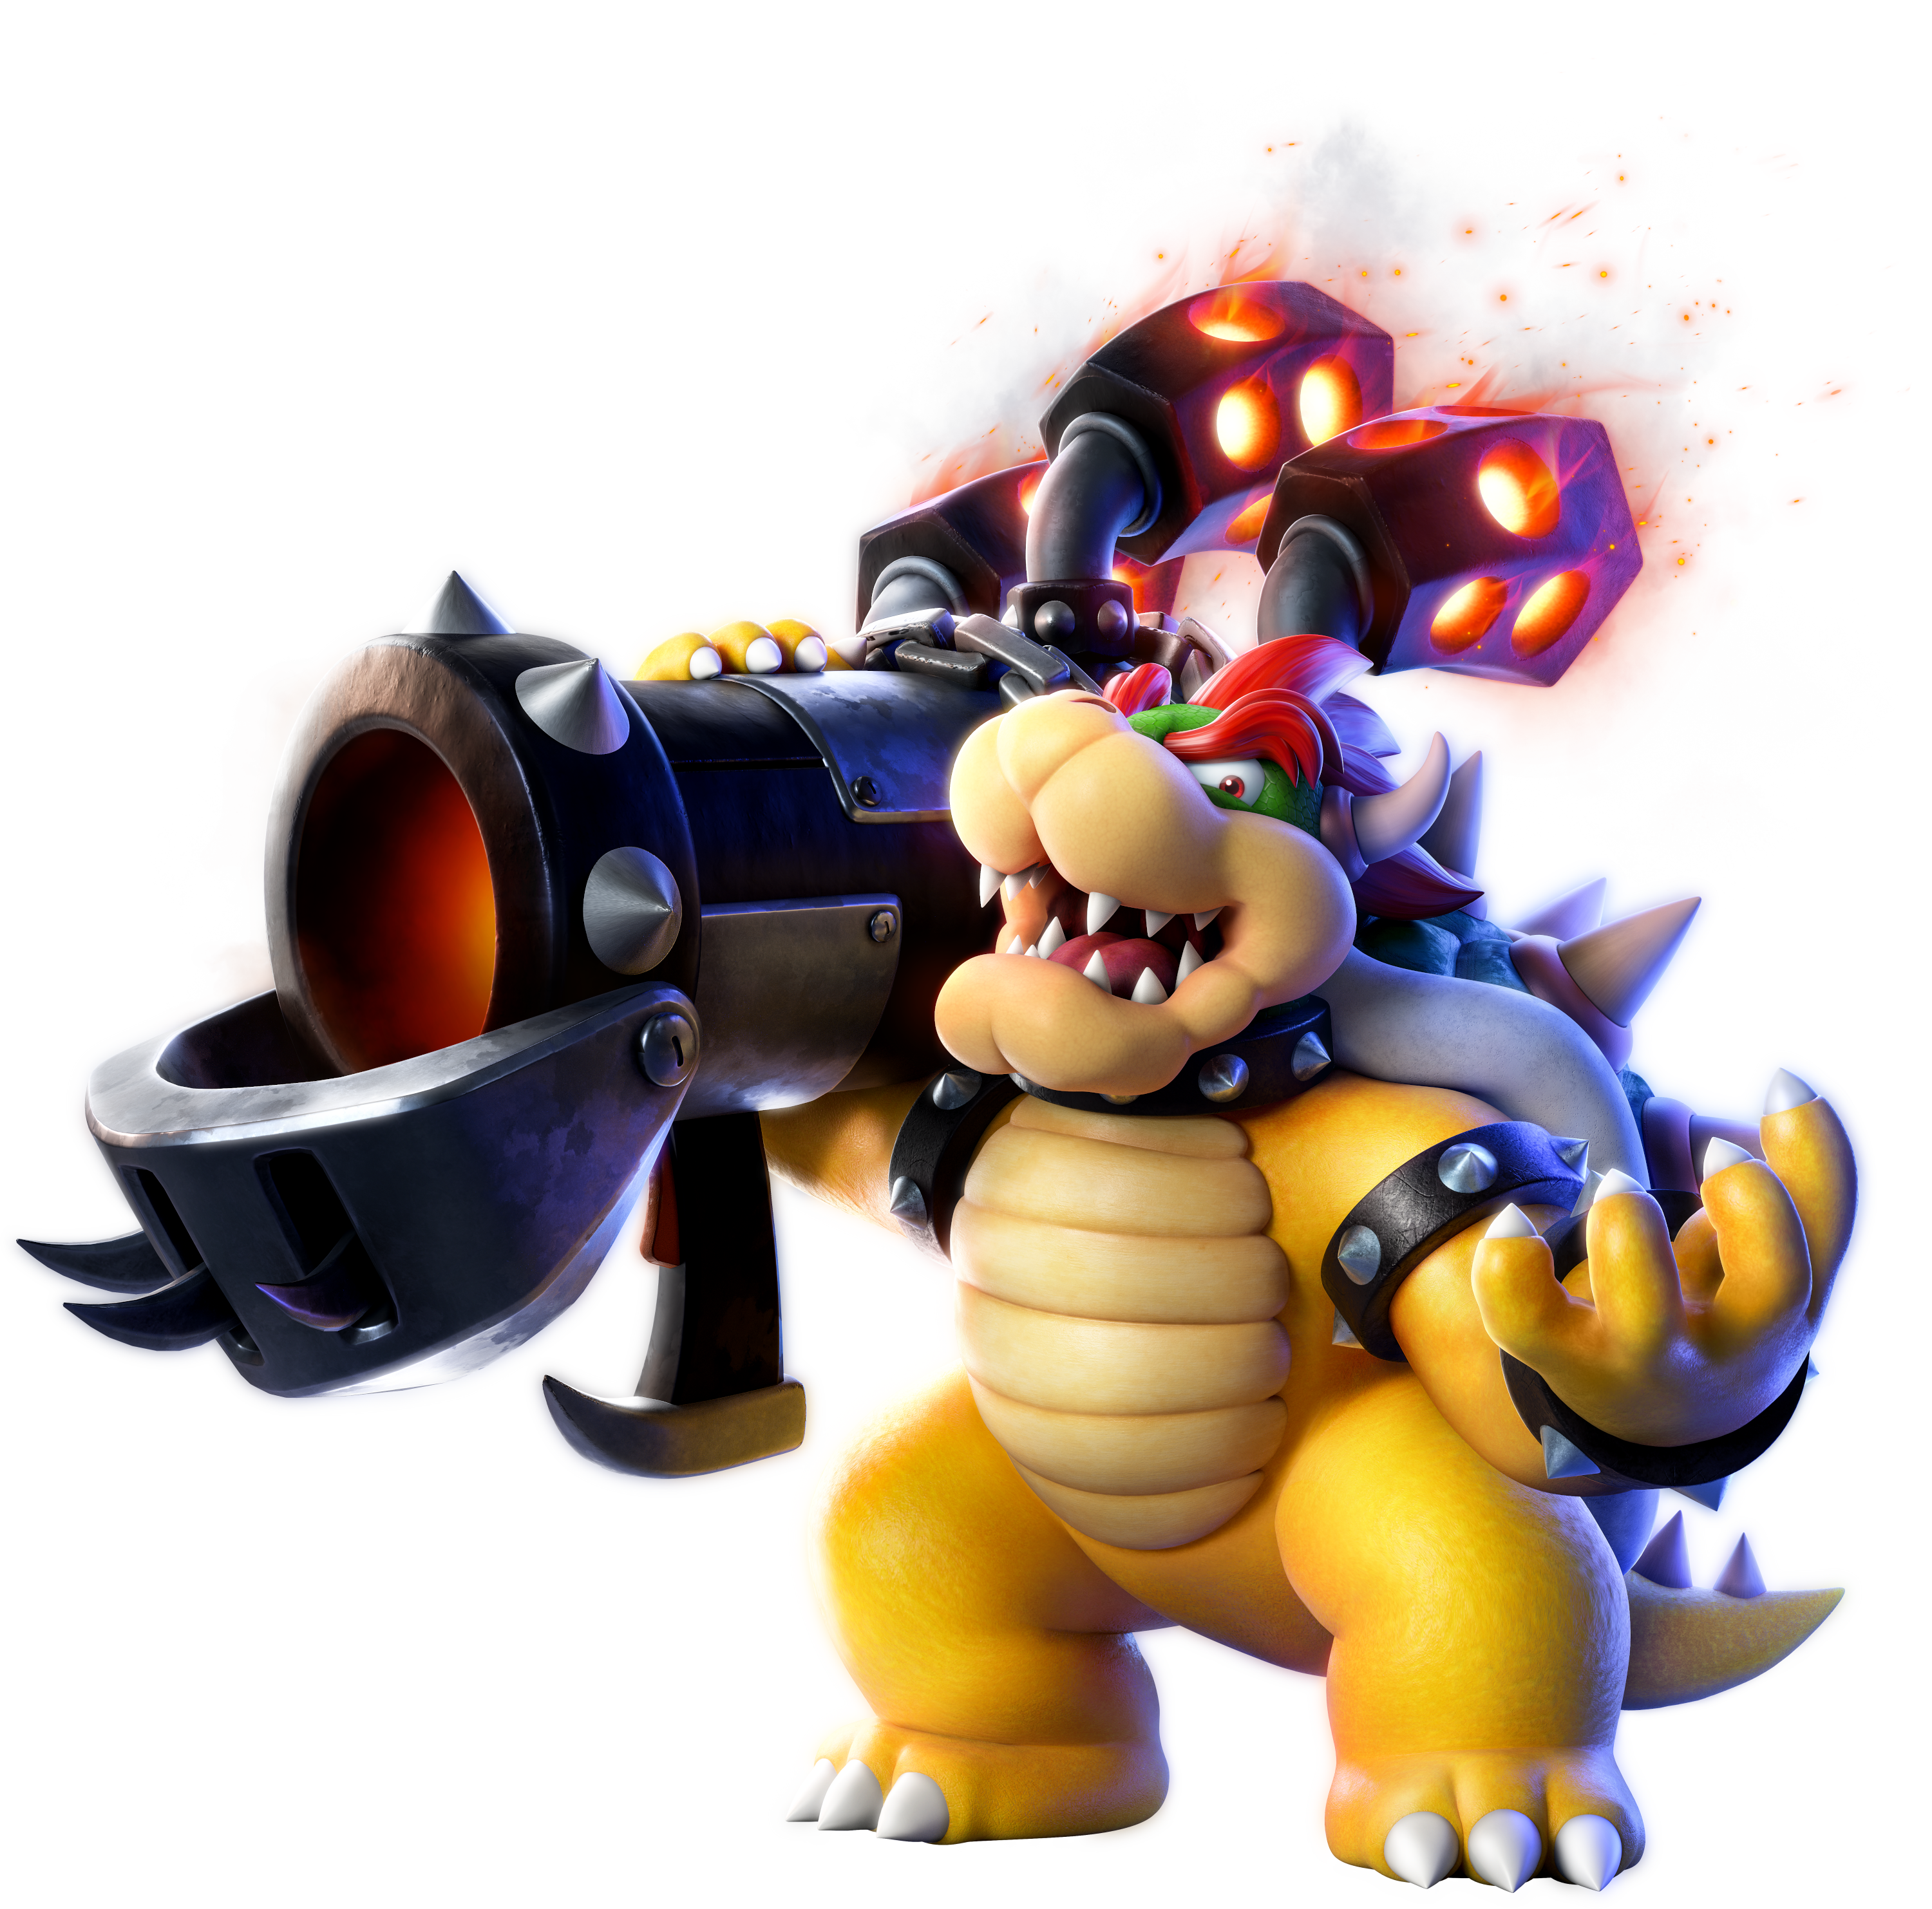 Artwork of Bowser from Mario + Rabbids Sparks of Hope